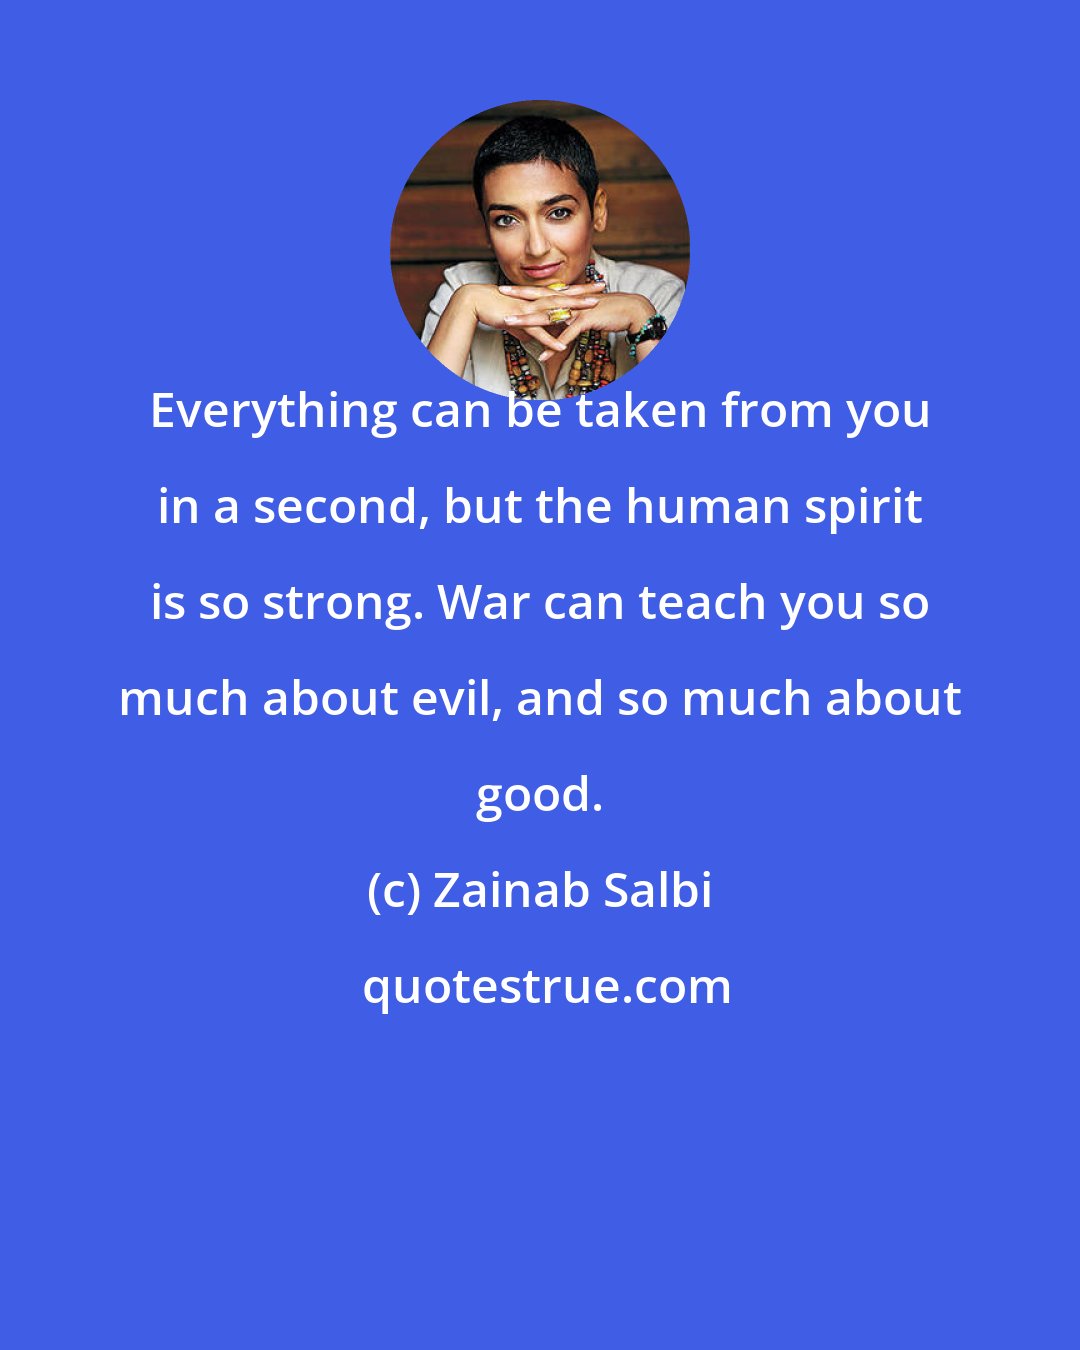 Zainab Salbi: Everything can be taken from you in a second, but the human spirit is so strong. War can teach you so much about evil, and so much about good.